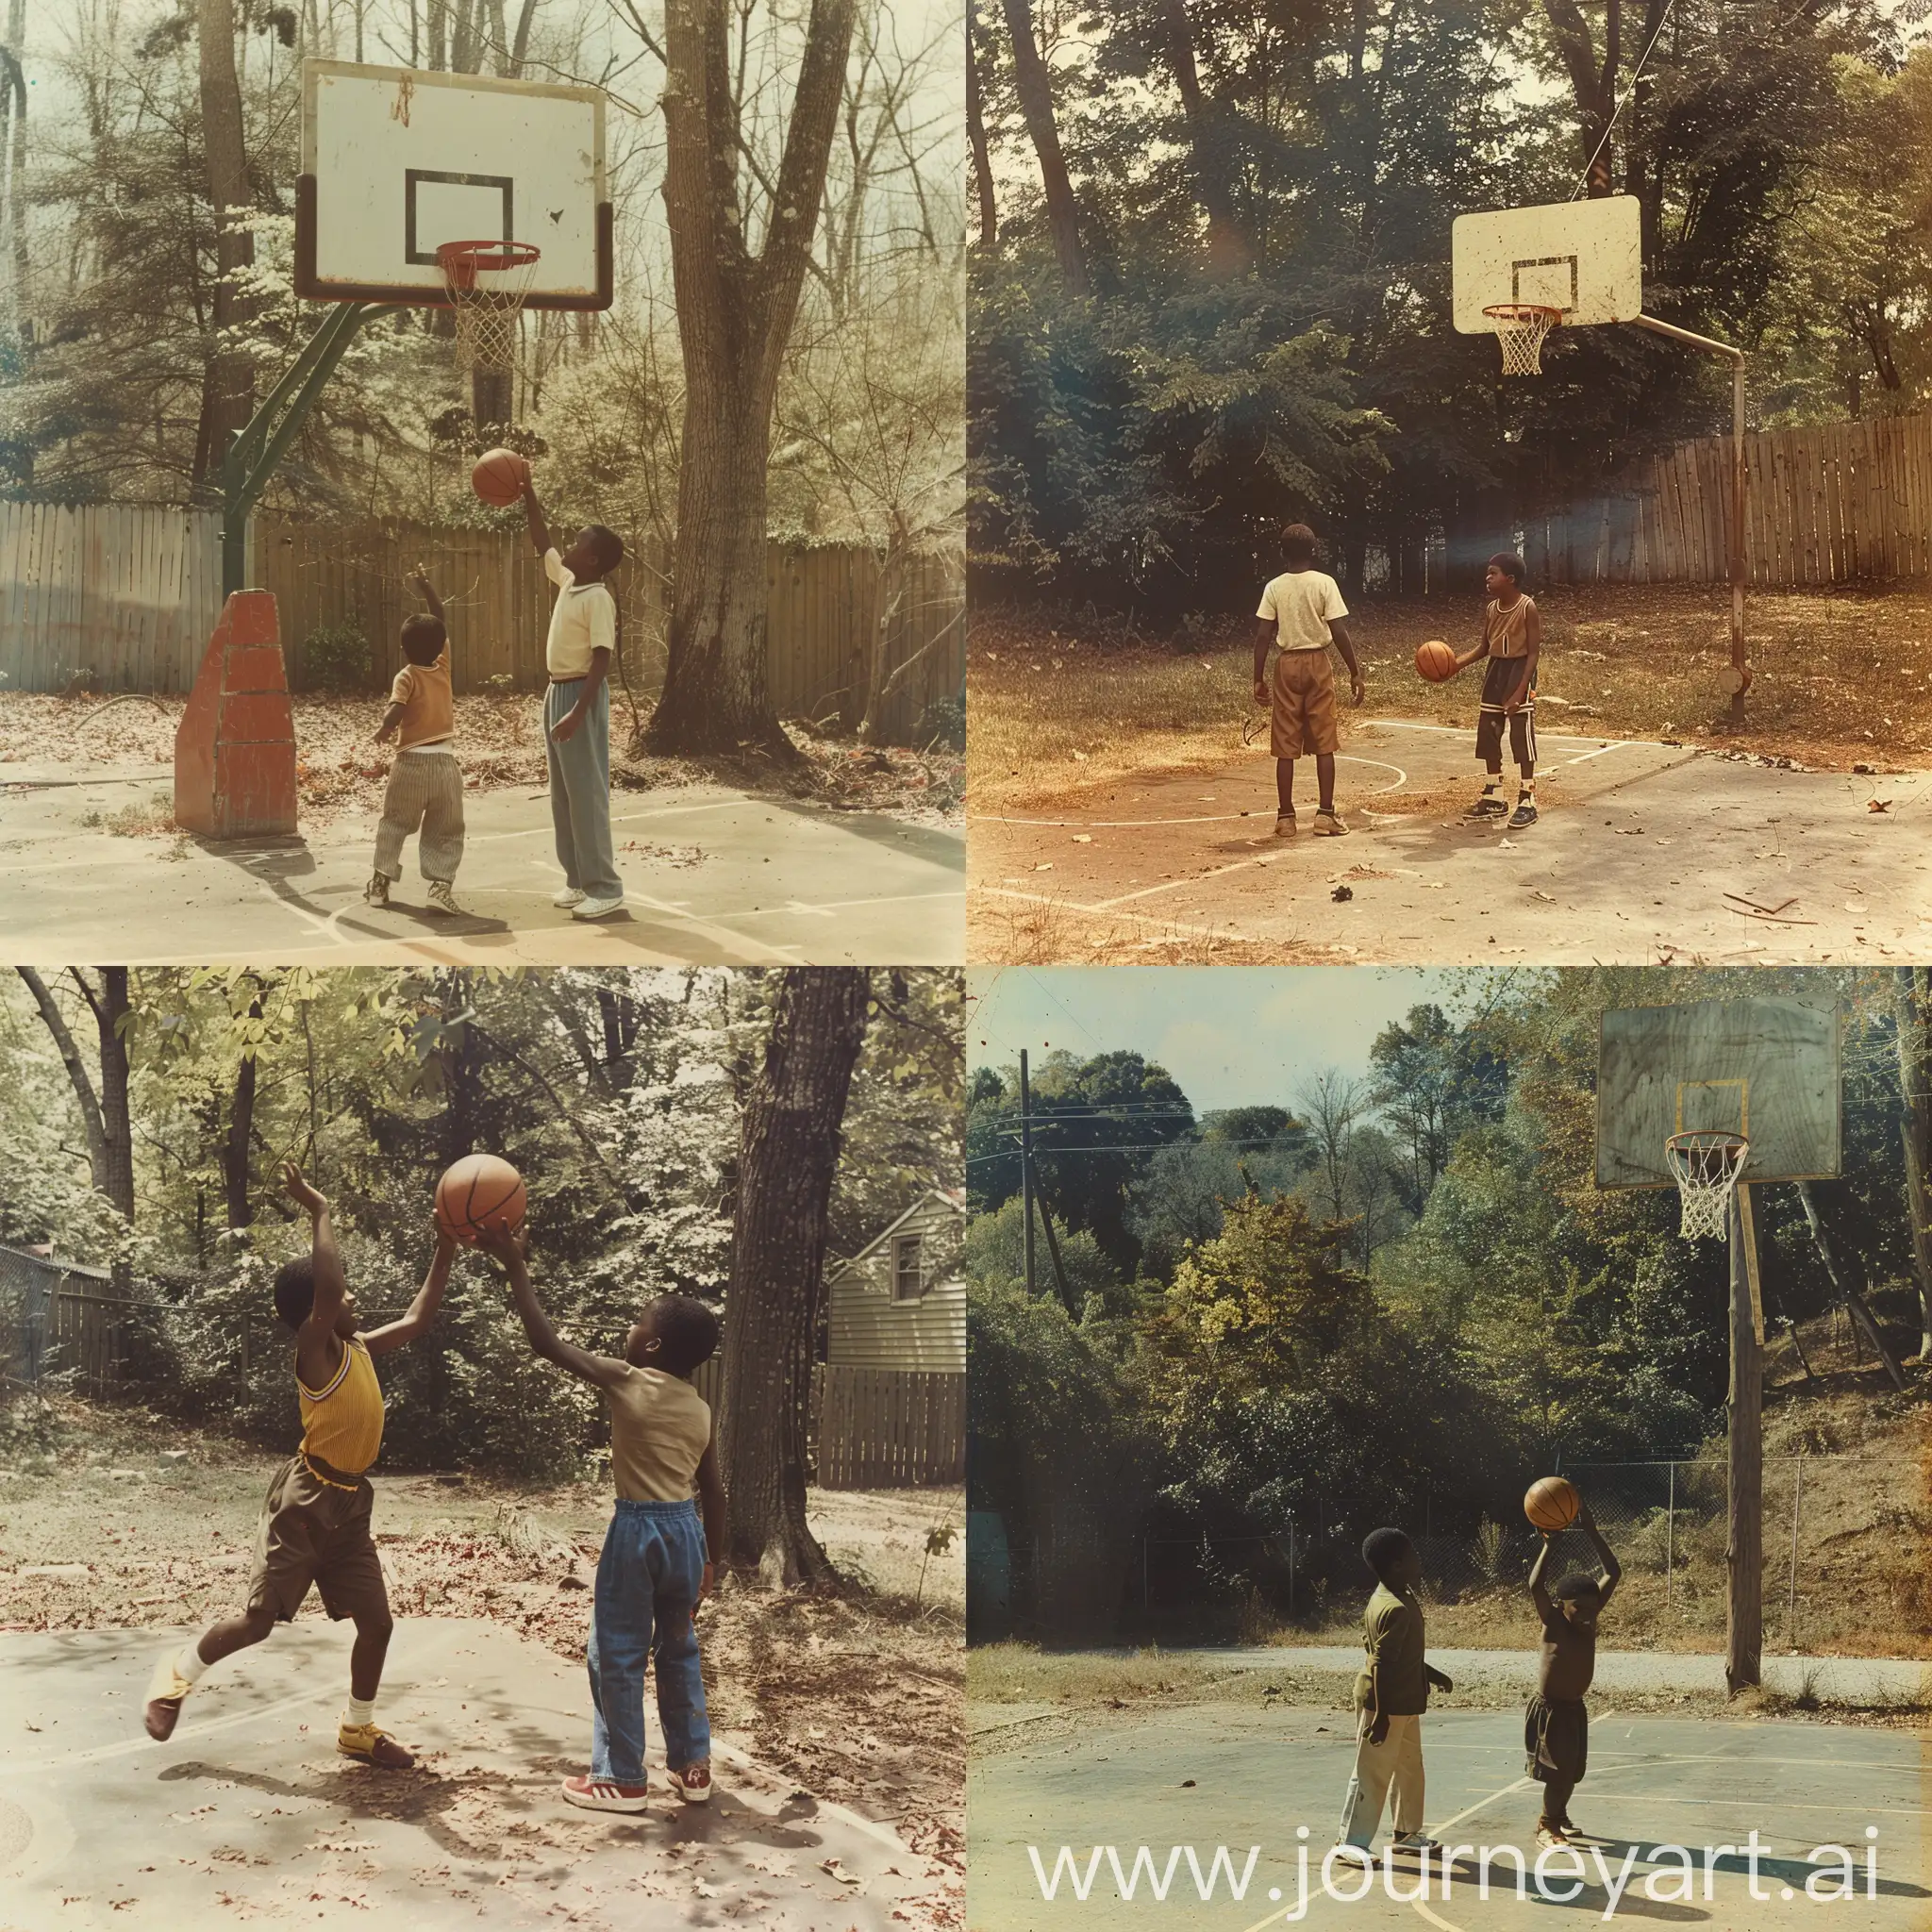 A 1970s Photograph,of a Black Kid playing basketball with his brother in his backyard,It is a sunny day and in the background is a forest.